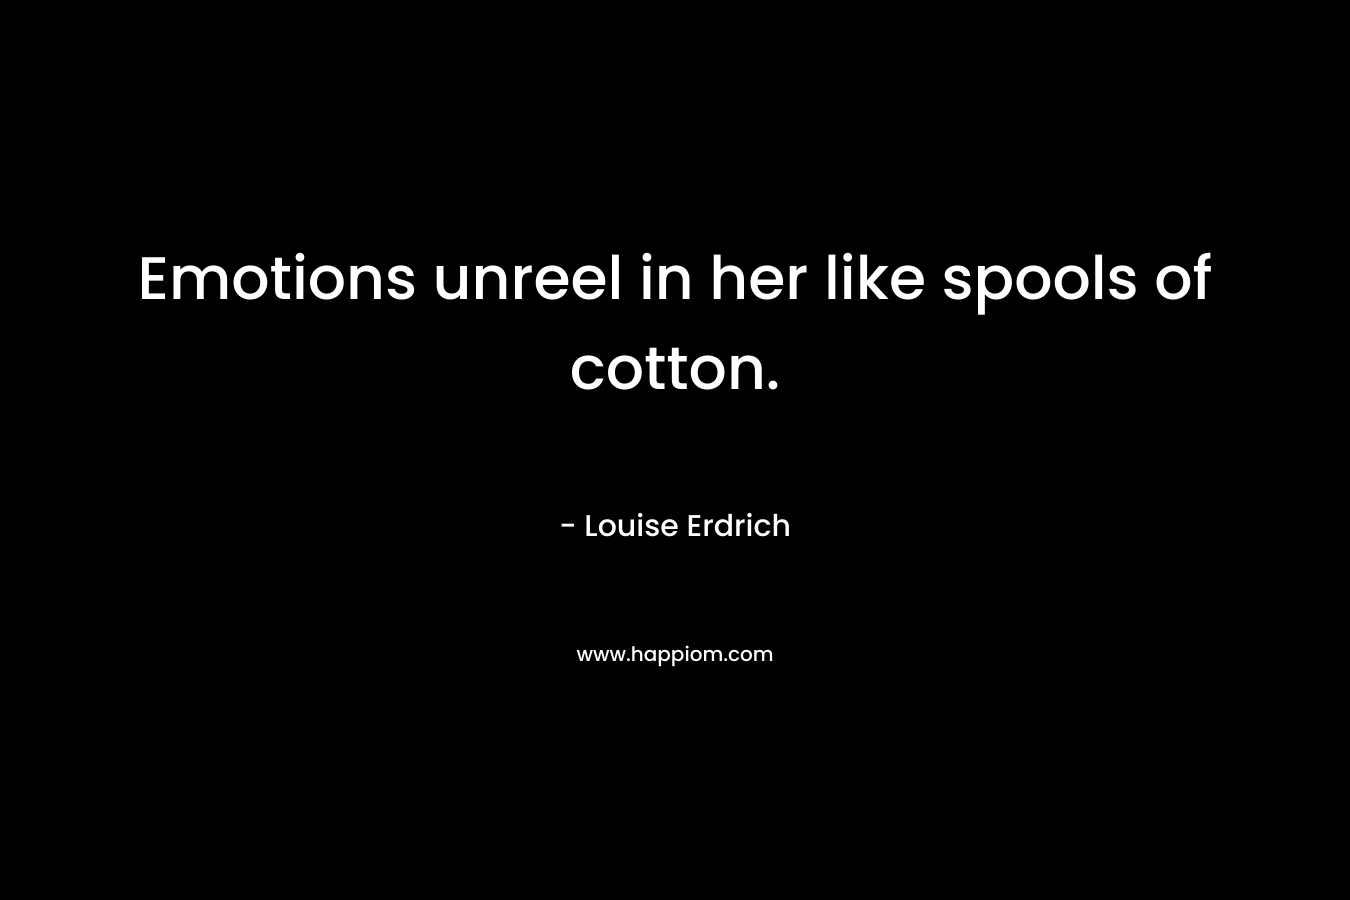 Emotions unreel in her like spools of cotton.